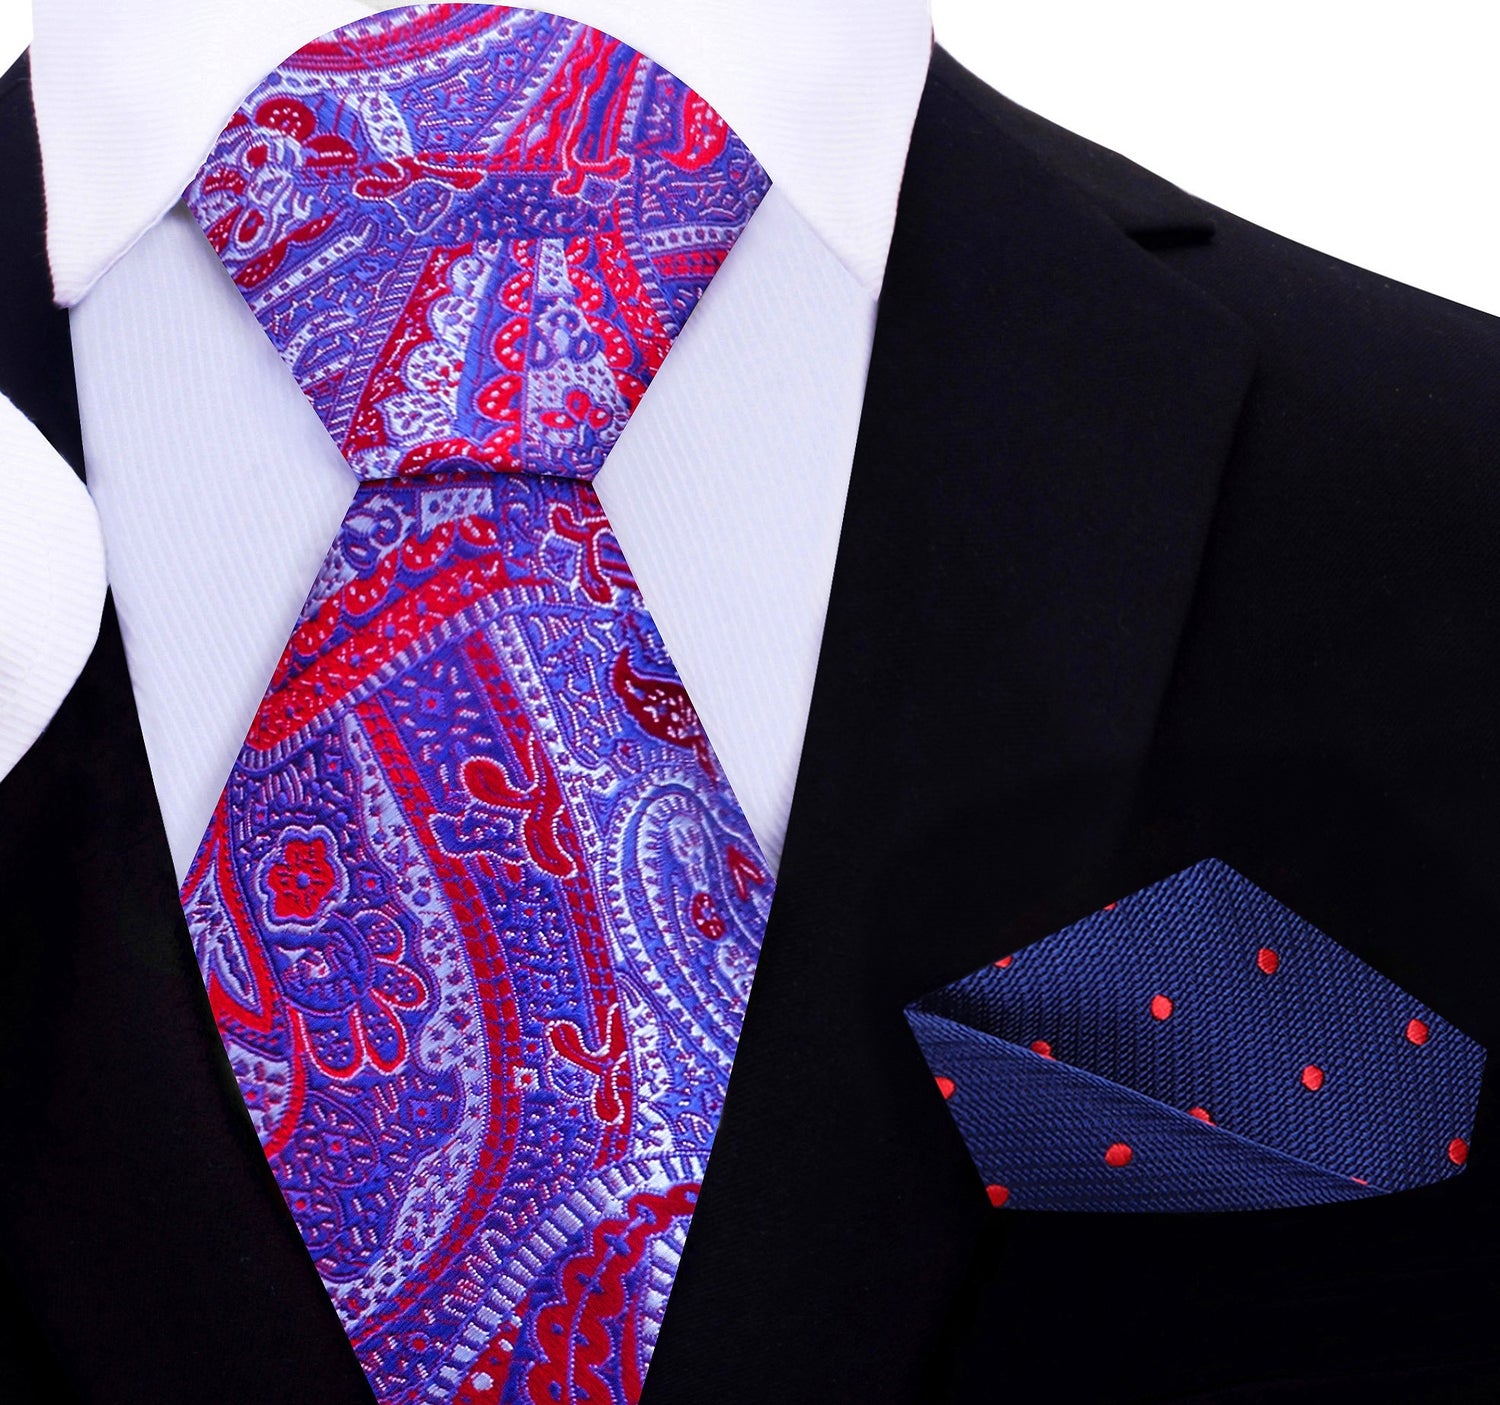 A Red, White, Blue Intricate Design And Paisley Pattern Silk Necktie, Blue, Red Dot Pocket Square